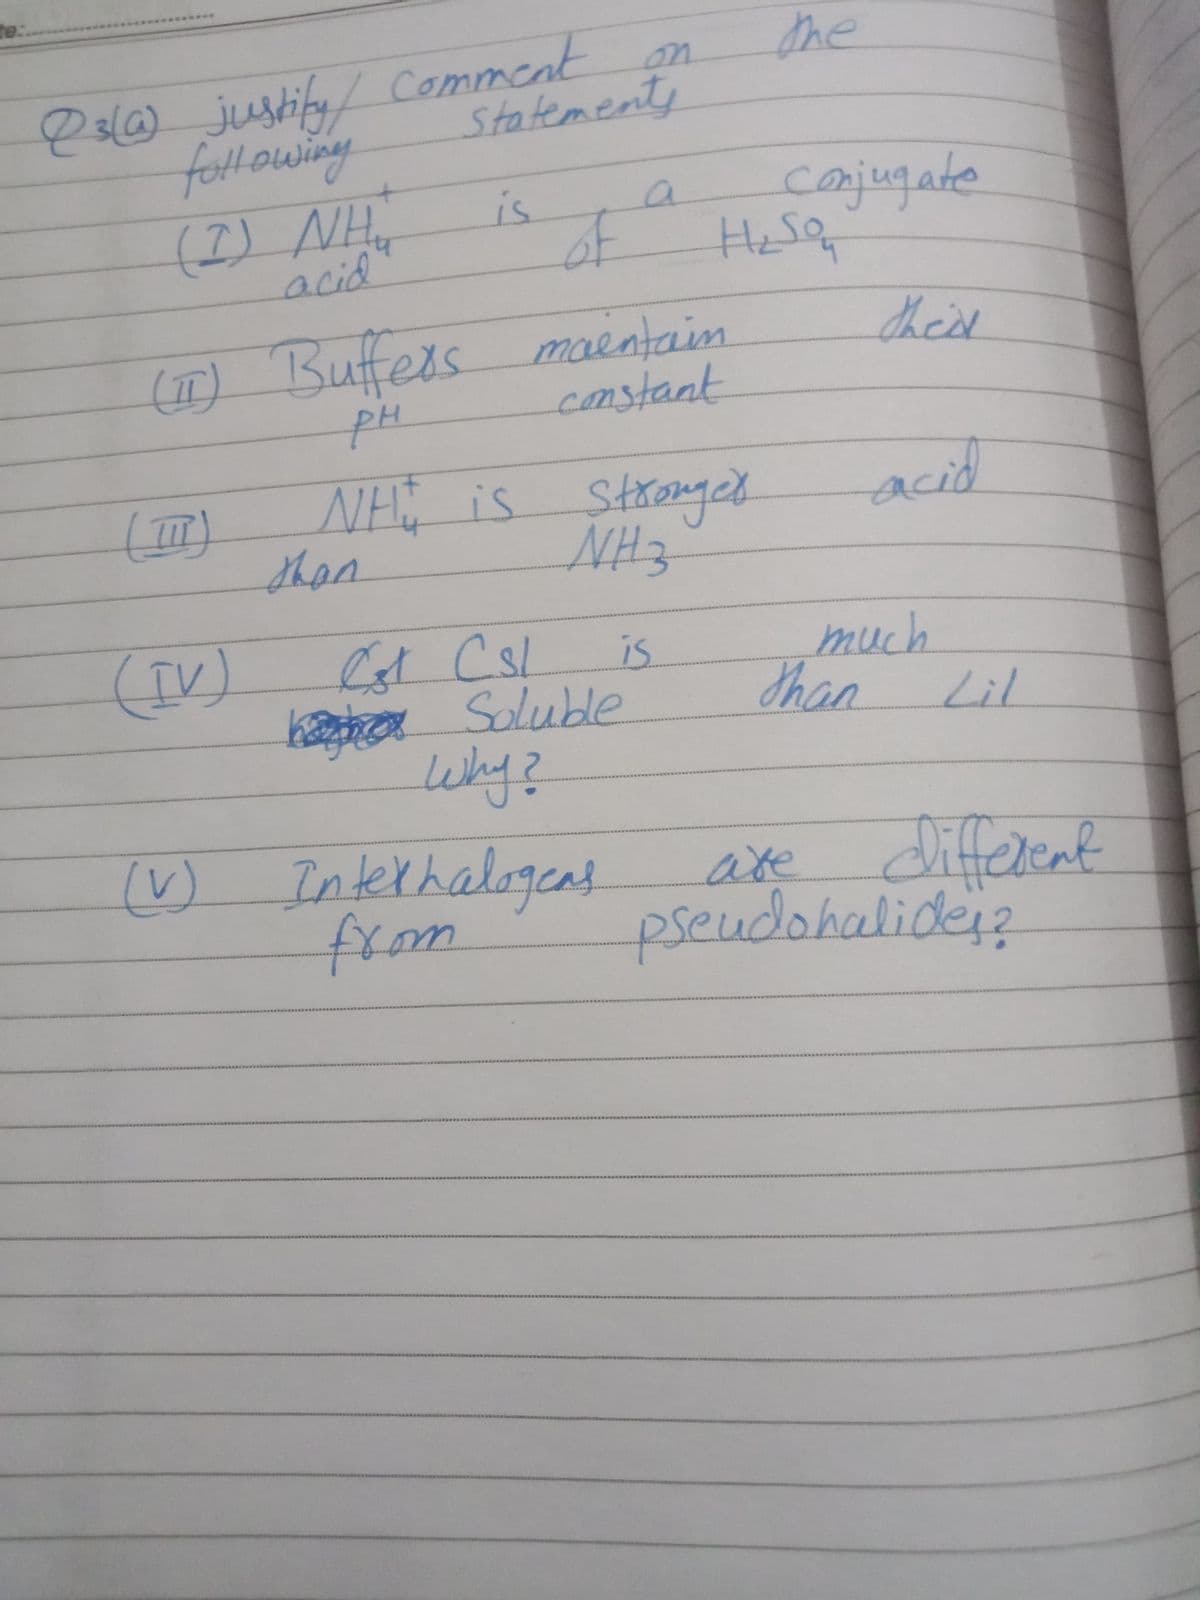 te:
esl6) justifu Comment
fottlowing
the
on
statements
(I) NH.
acid
is
of
Hesa
(IT) Bufeis
pH
thisd
maentain
constant
NH is
Strongeh
acid
than
NH3
(IV)
kaephaa Soluble
Why?
is
much
Shan Lil
() Interhalogeas
from
टा2
enf
pseudohalider2
ate
